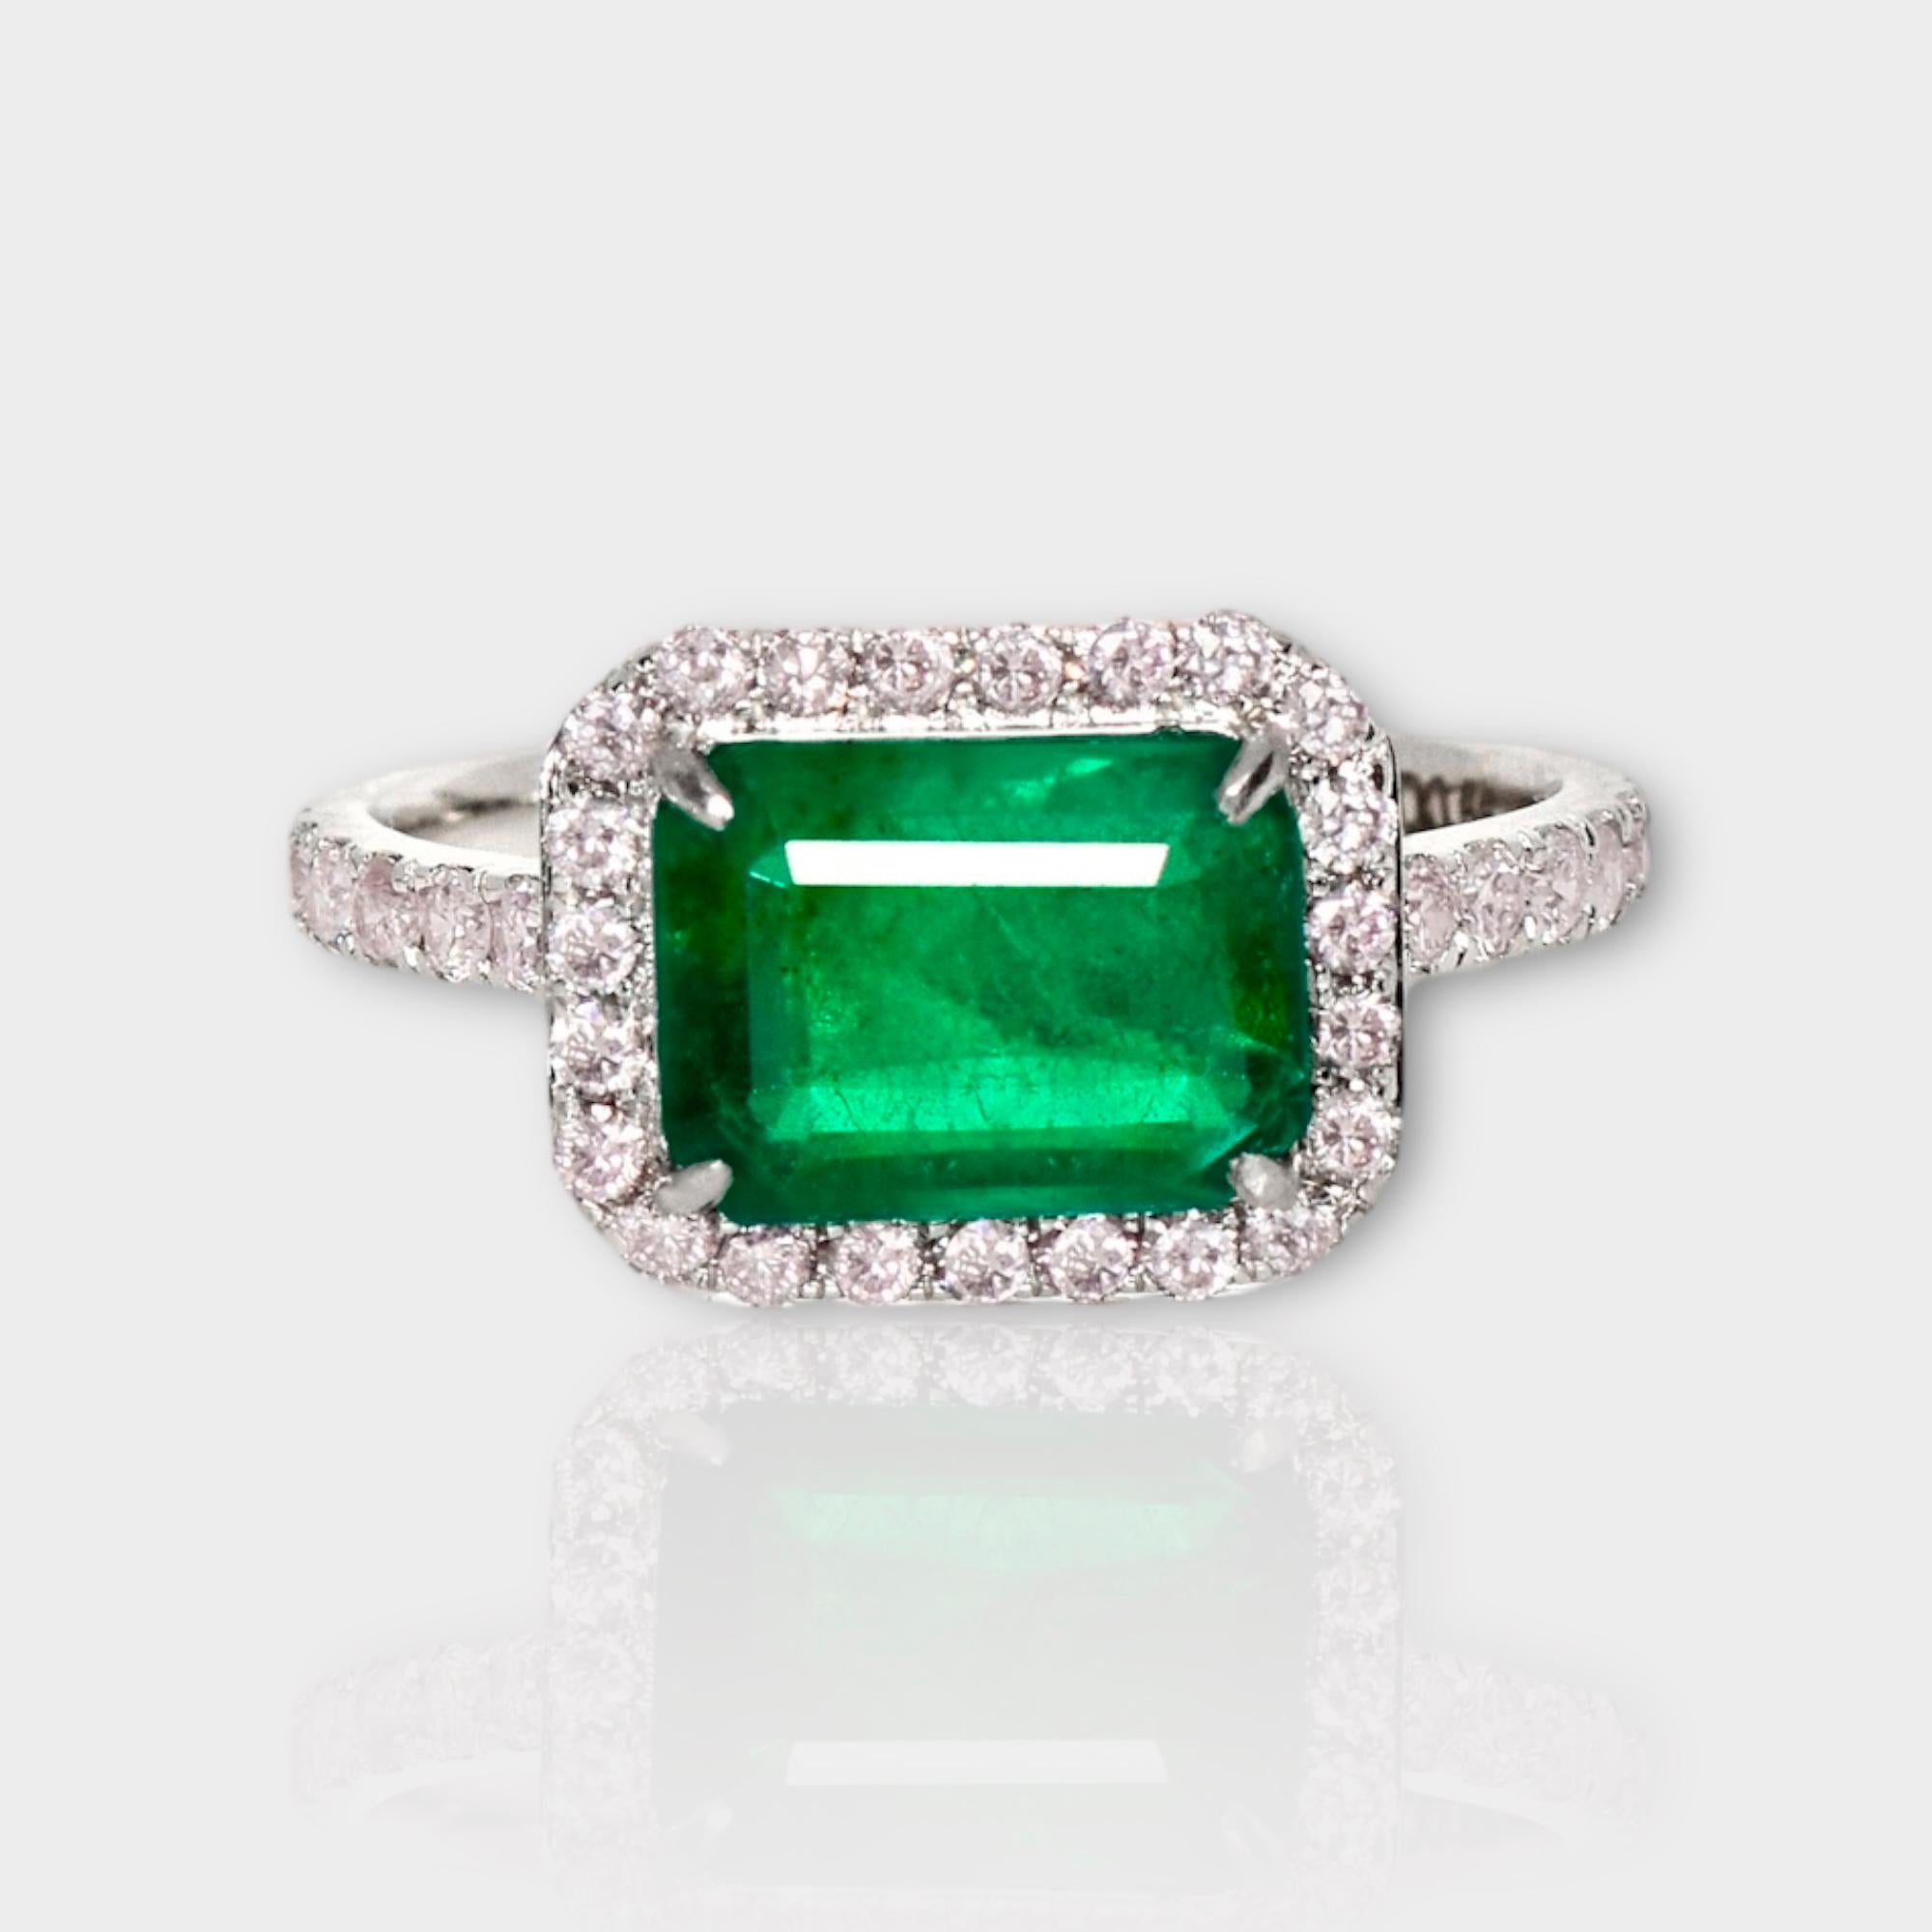 *IGI 18K 1.93 ct Natural Green Emerald&Pink Diamond Art Deco Engagement Ring*
IGI-certified natural Zambia green emerald weighing 1.93 ct set on the 18K white gold arc deco design band with natural pink diamonds weighing 0.55 ct. 

The good-quality